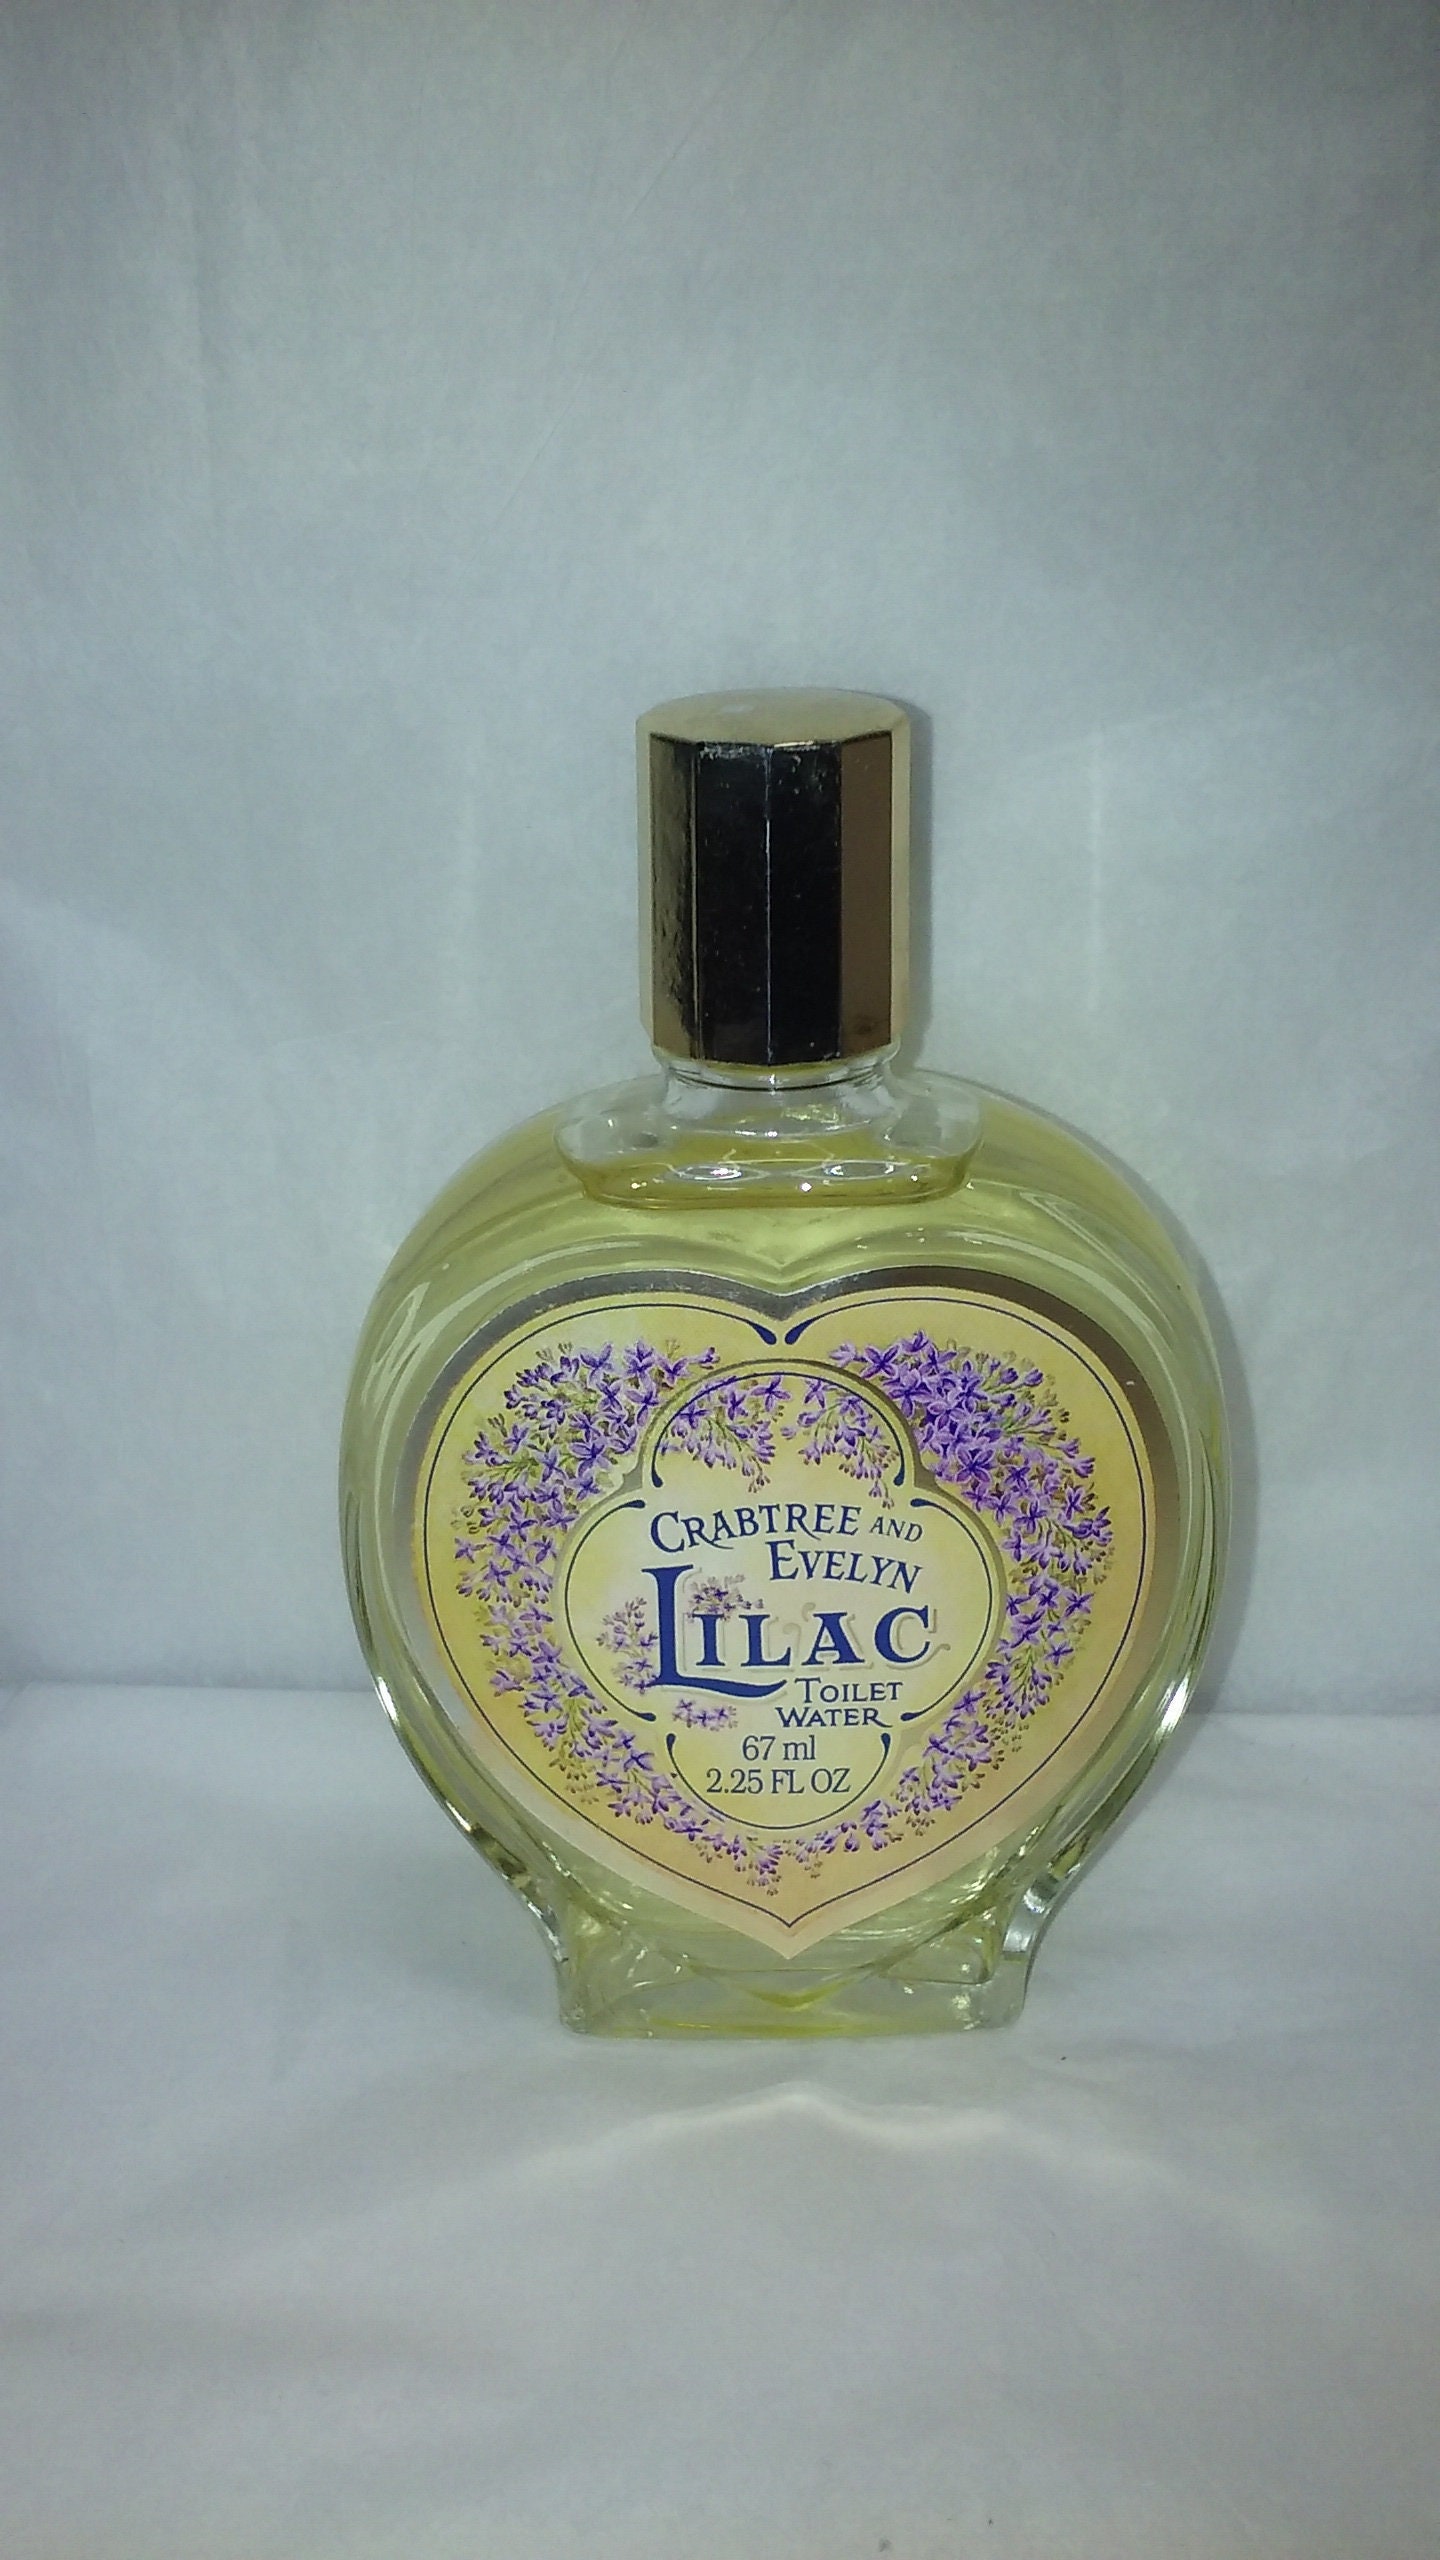 Crabtree Evelyn Lilac Lilas Eau Floral Water 2, 25 Oz von somersetantiques1